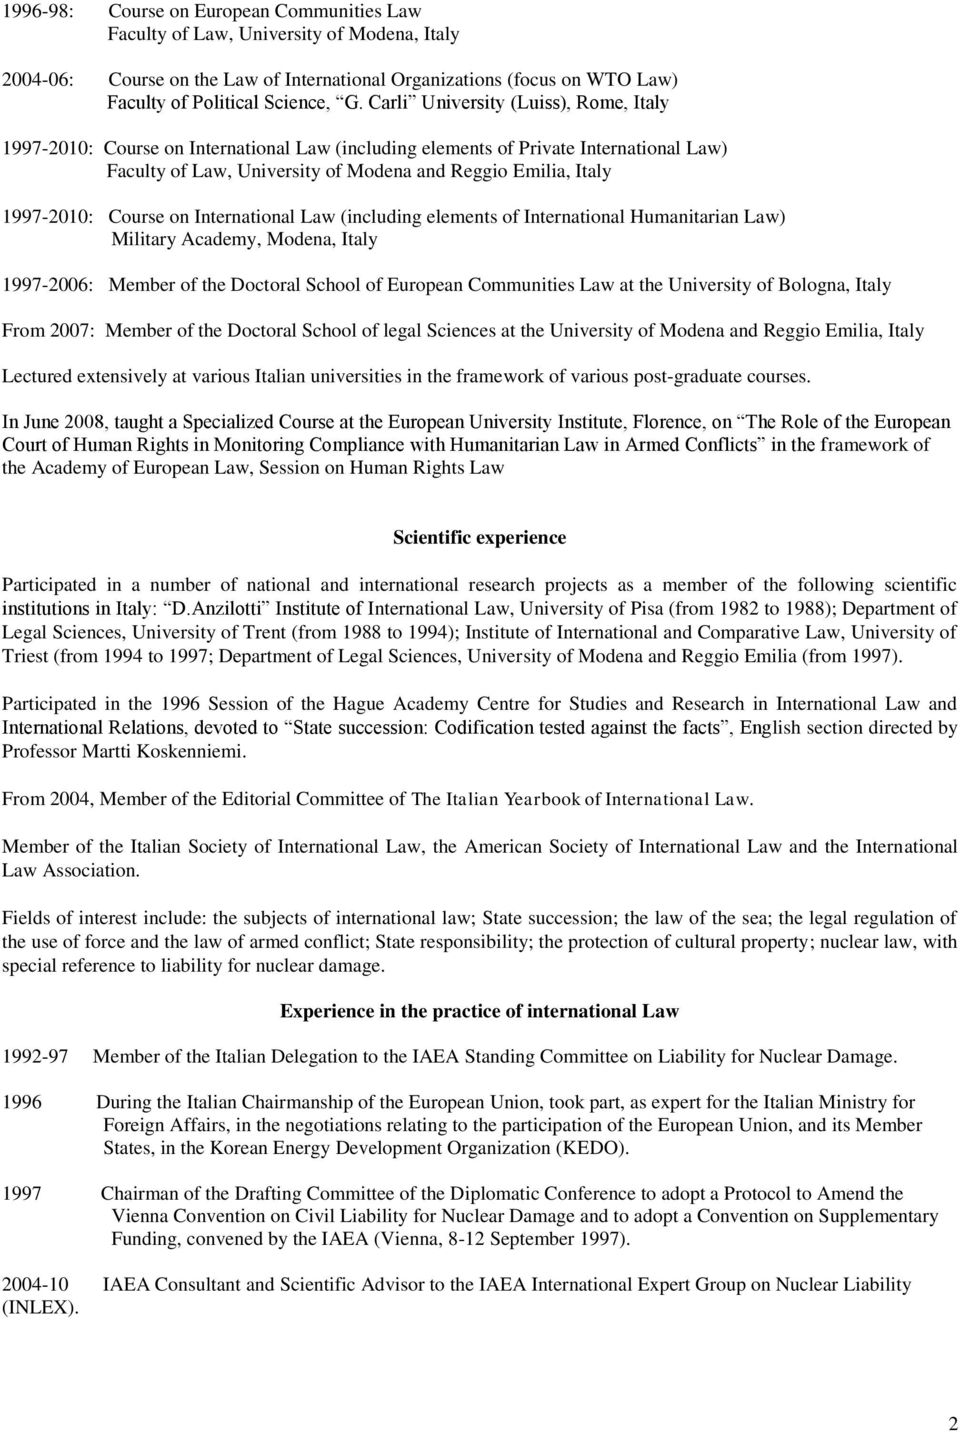 Course on International Law (including elements of International Humanitarian Law) Military Academy, Modena, Italy 1997-2006: Member of the Doctoral School of European Communities Law at the